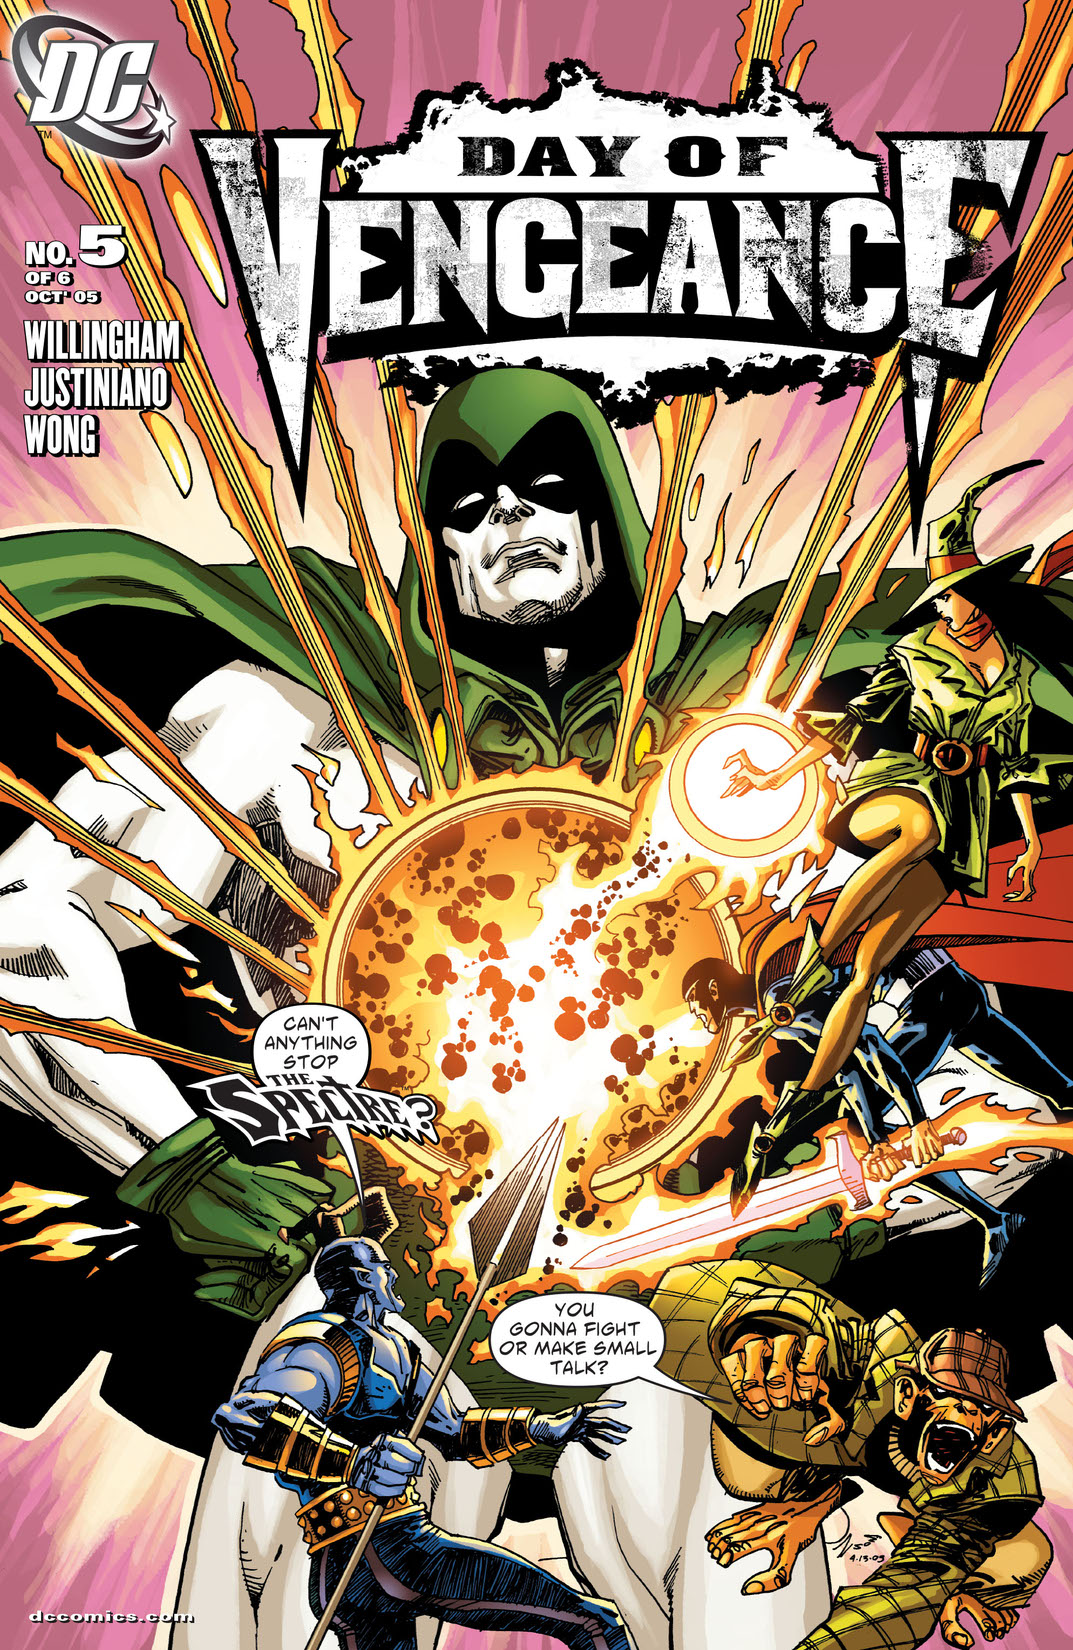 Day of Vengeance #5 preview images